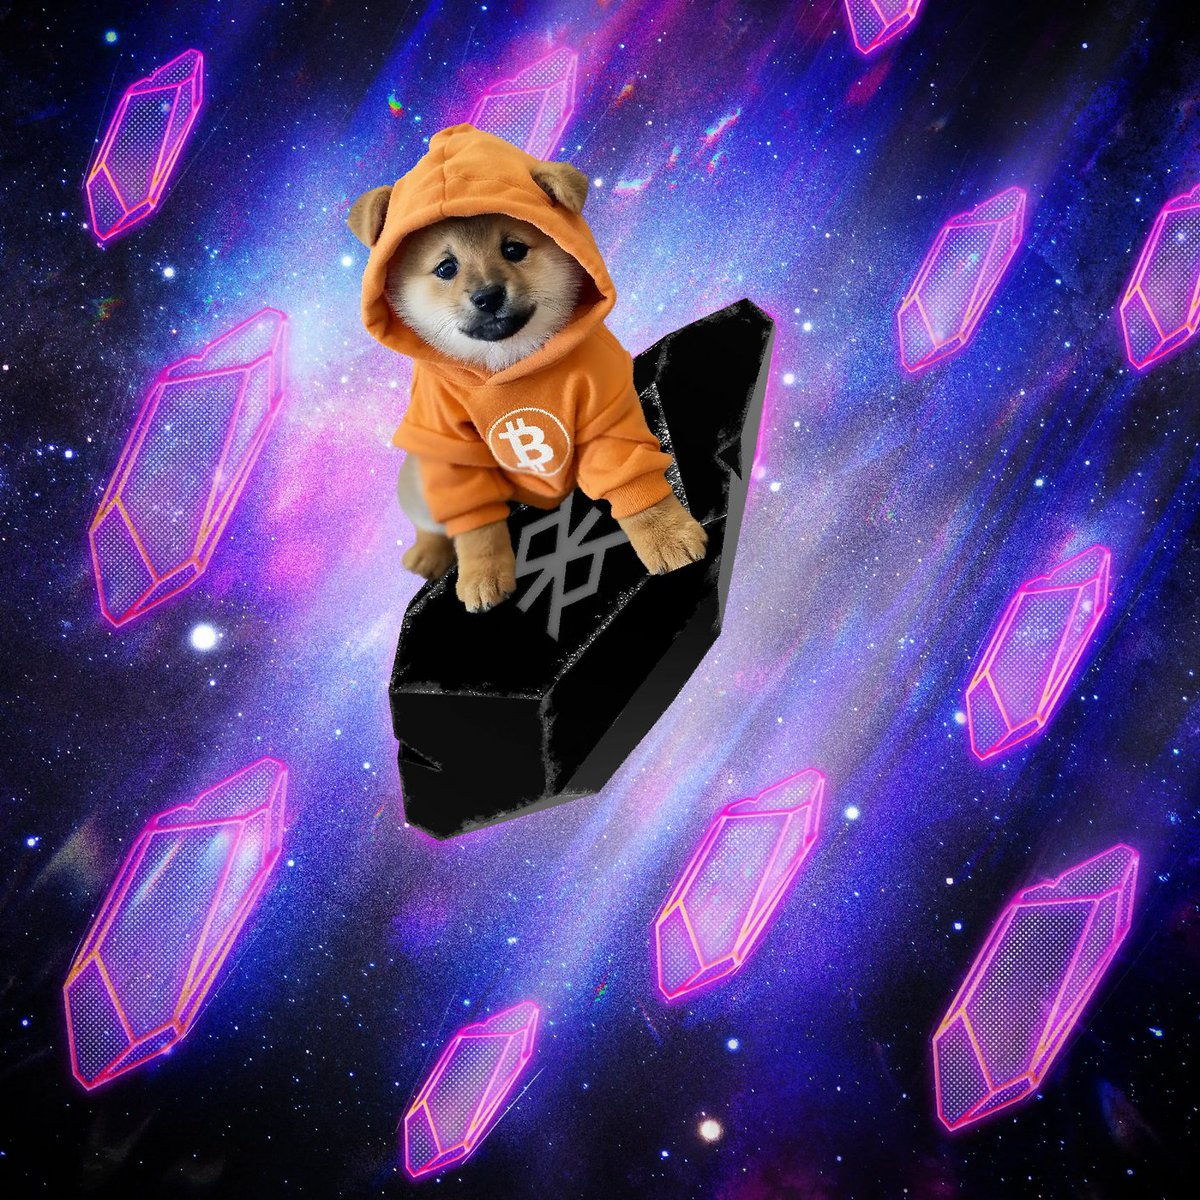 @LeonidasNFT $DOG BRC 20 is coming! 🚀 Visit public sale and buy some $DOG before listing starts presale-rune.dog Dog's mission is to become the #1 memecoin on planet earth and onboard millions of people to Bitcoin. Presale will closes after 48h. Don`t miss out! 🔥